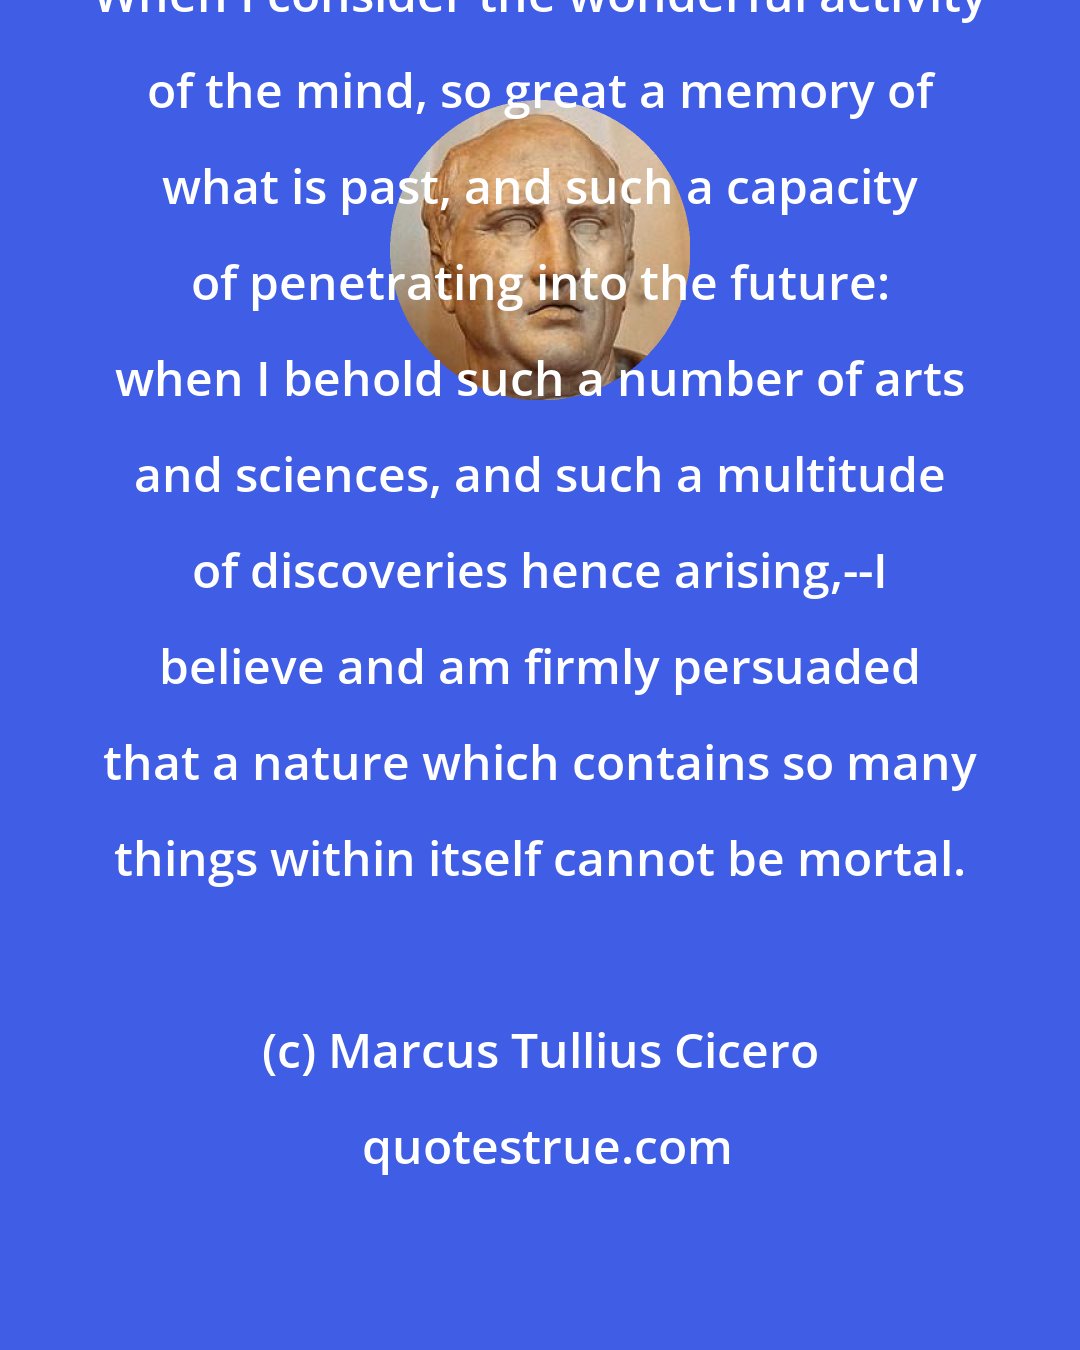 Marcus Tullius Cicero: When I consider the wonderful activity of the mind, so great a memory of what is past, and such a capacity of penetrating into the future: when I behold such a number of arts and sciences, and such a multitude of discoveries hence arising,--I believe and am firmly persuaded that a nature which contains so many things within itself cannot be mortal.